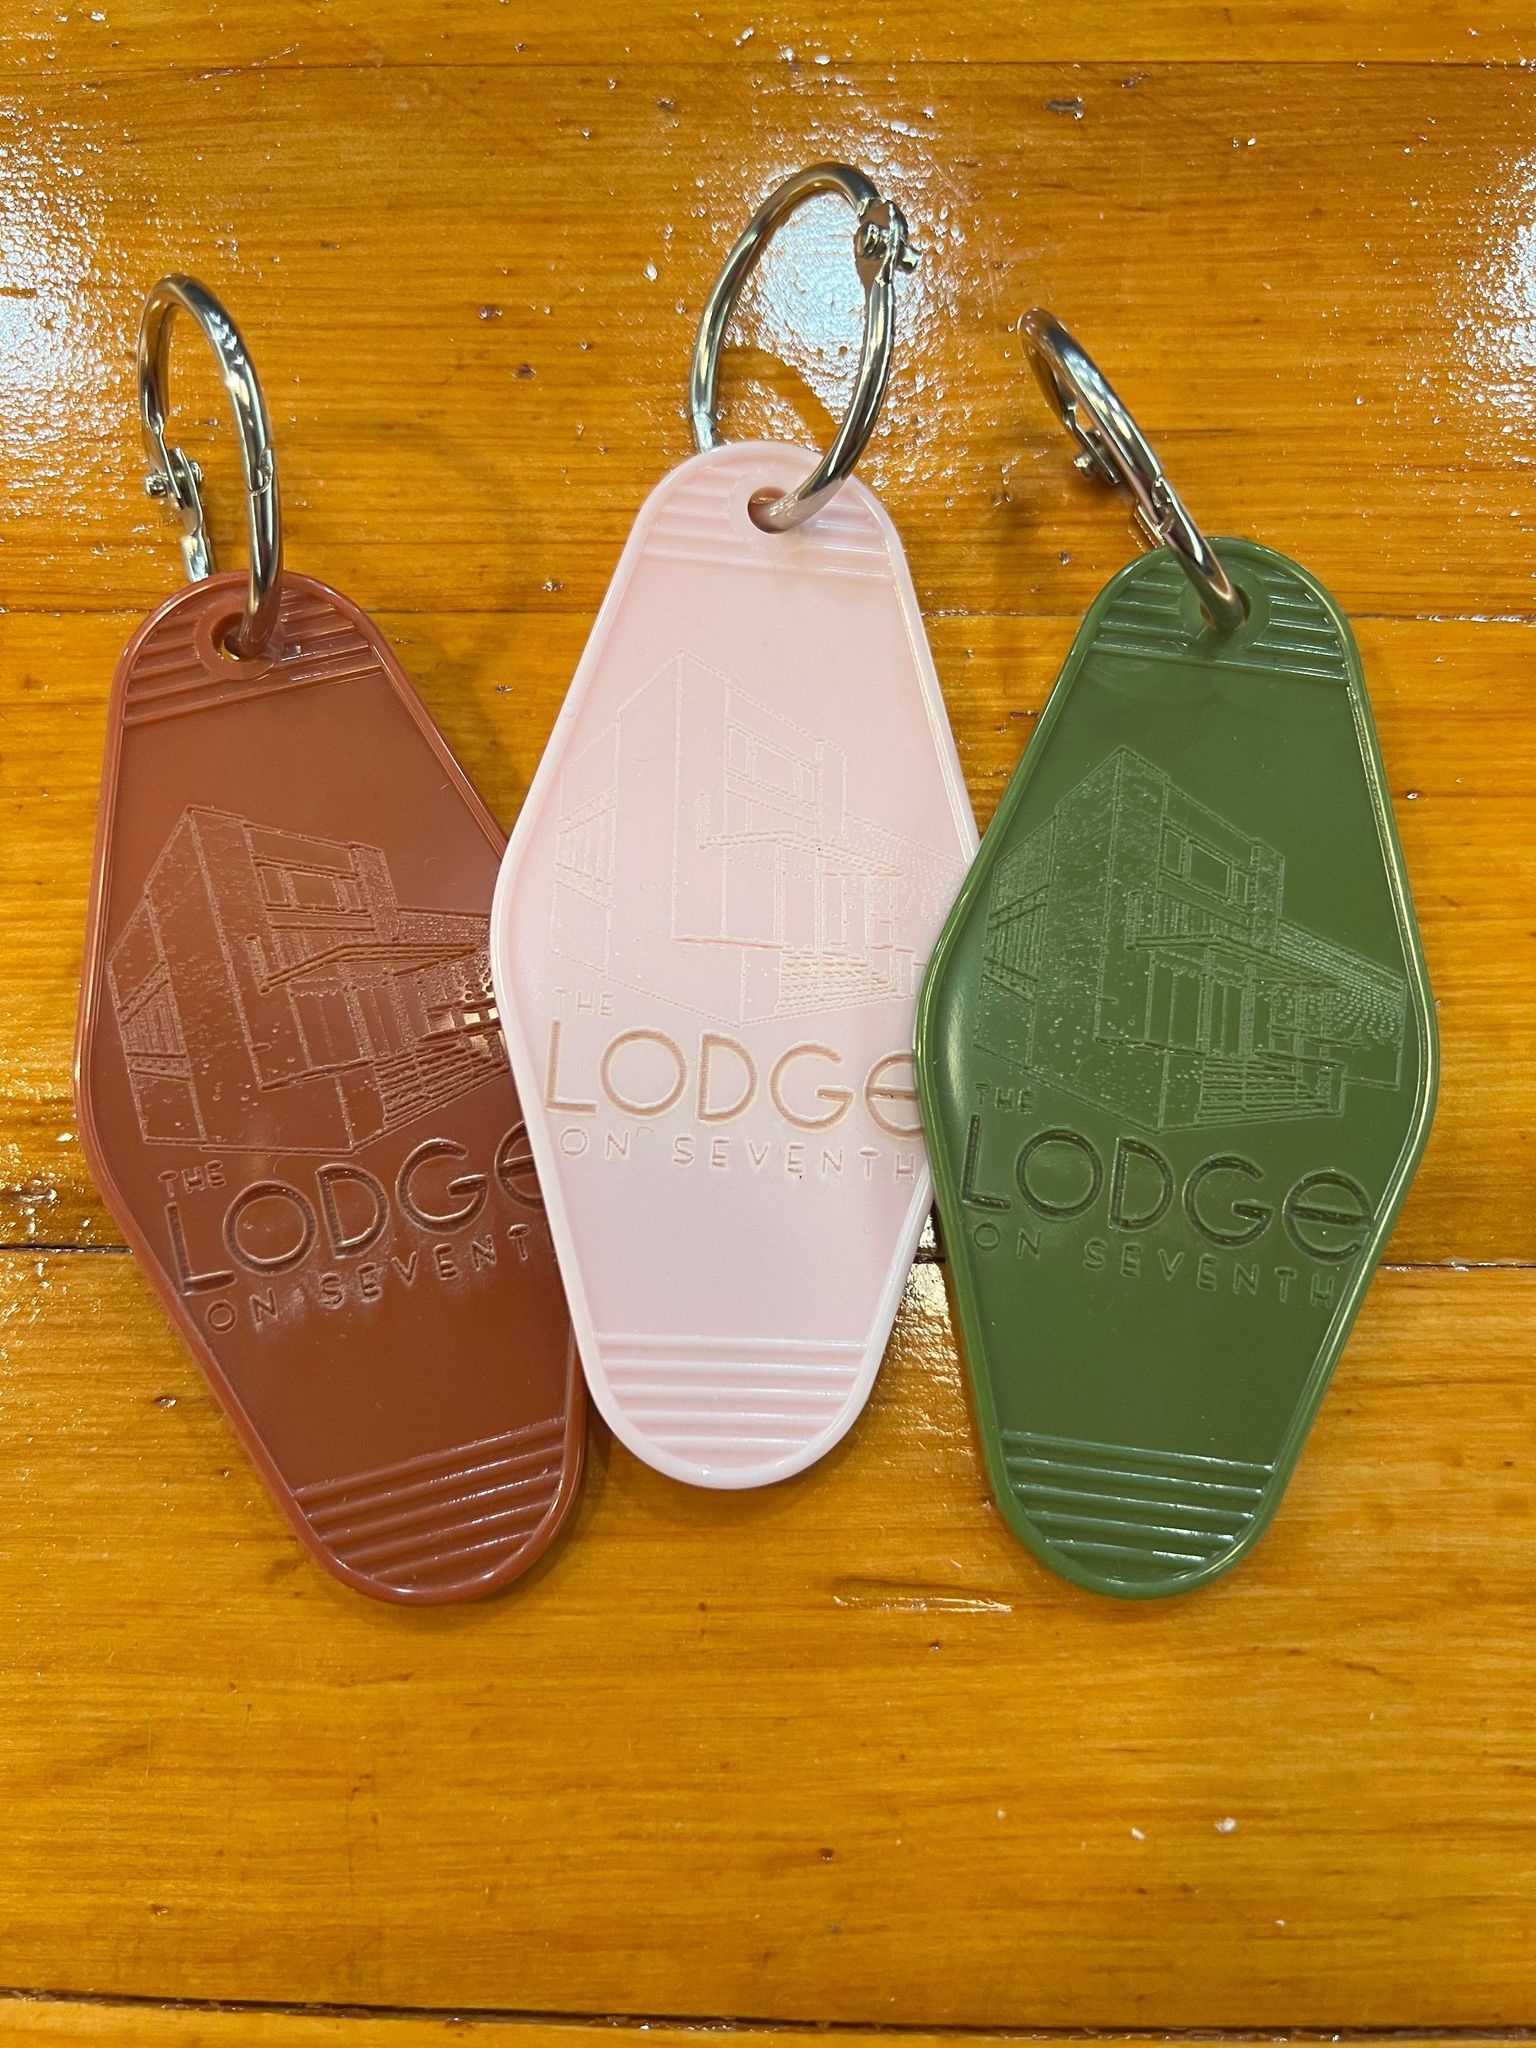 THE LODGE ON SEVENTH HOTEL ROOM STYLE KEYCHAIN